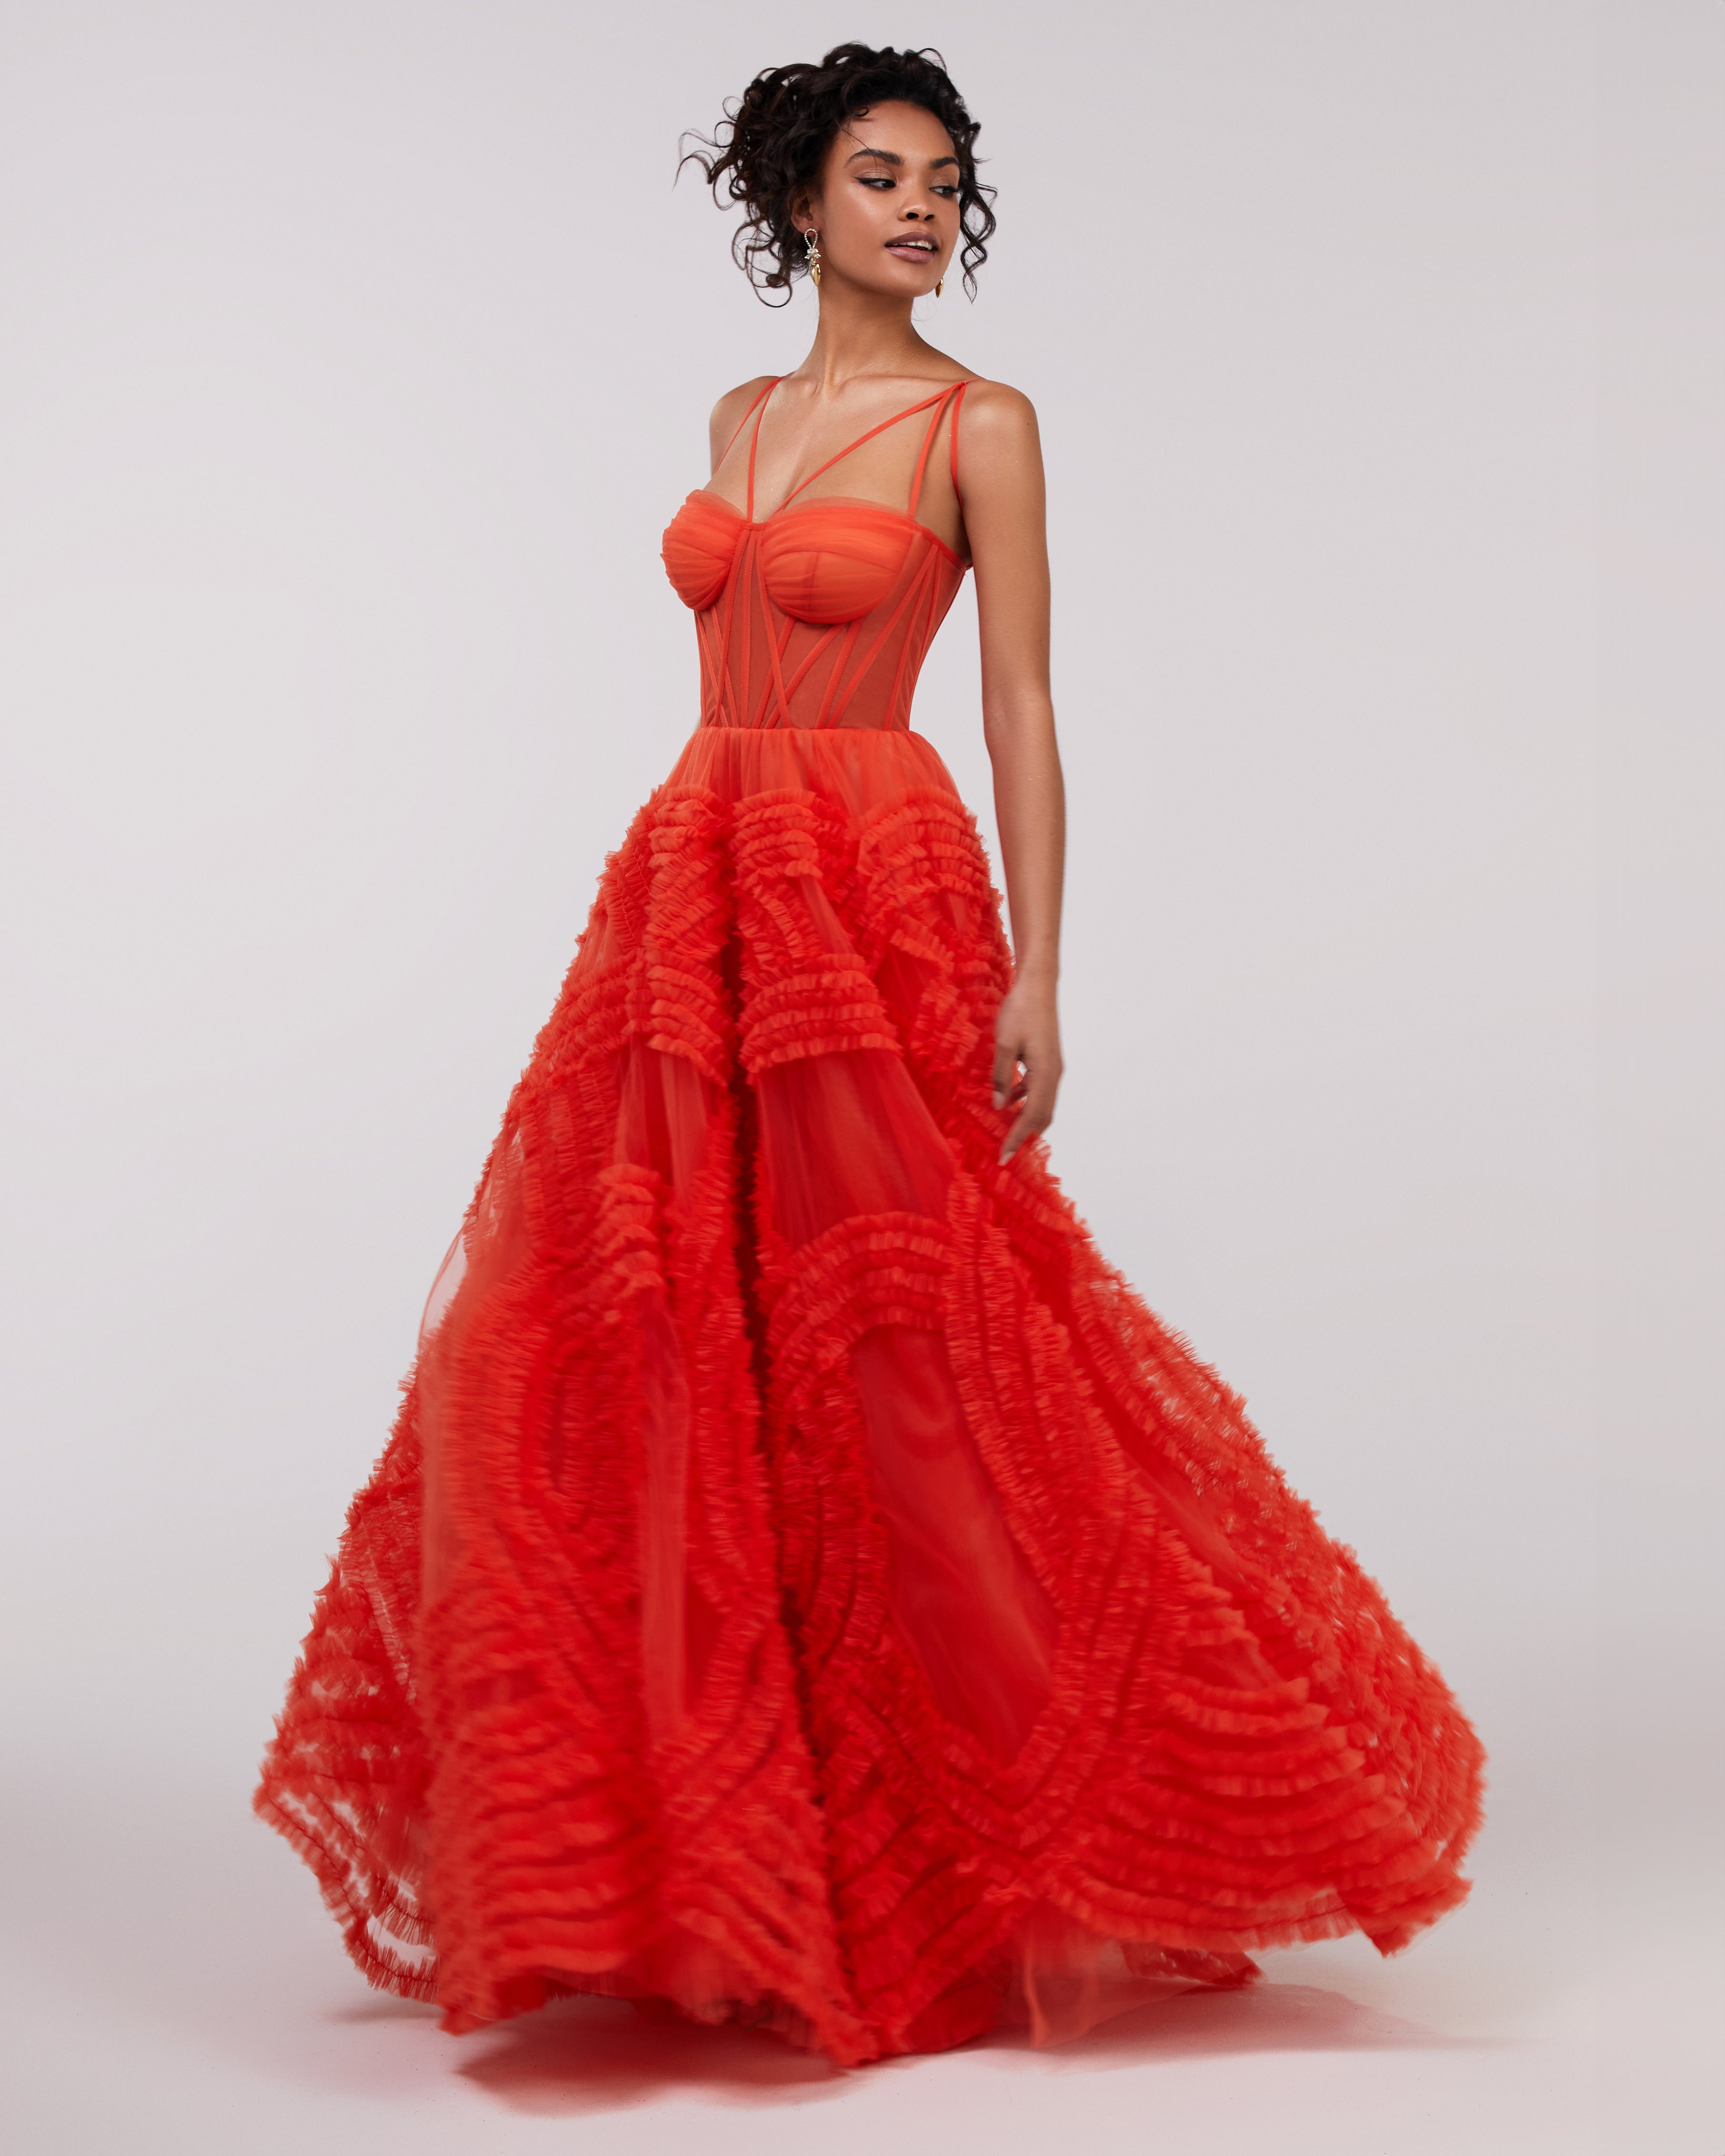 Misty Rose Tulle Maxi Dress with a Corset Bustier